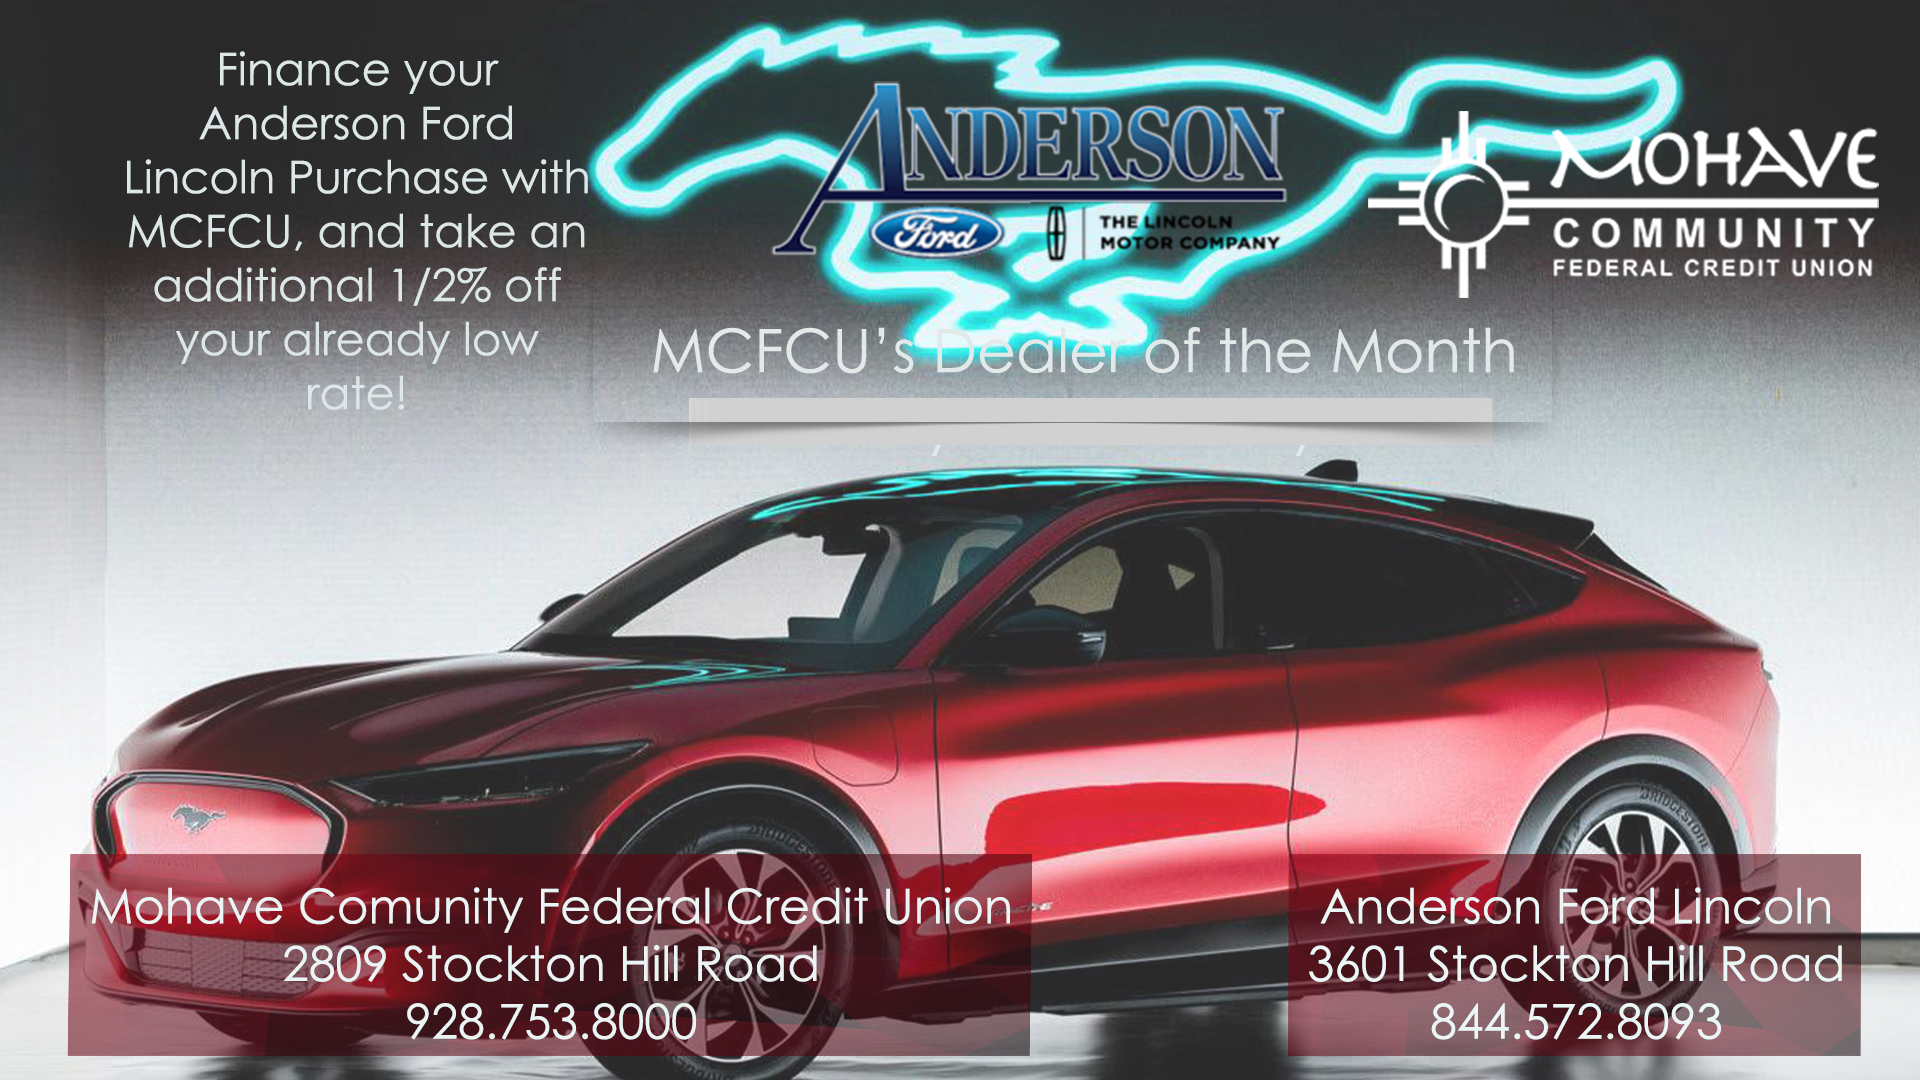 Anderson Ford of Kingman is our dealer of the month! When you finance your Anderson Ford purchase with Mohave Community FCU you will recieve an additional 1/2% off your already low interest rate! All loans are subject to credit approval. Some restrictions may apply. Advertised Annual Percentage Rate (APR) may change without notice. Approval and rates are based upon credit history, type of product, debt to income, loan term and loan to value. Member NCUA.